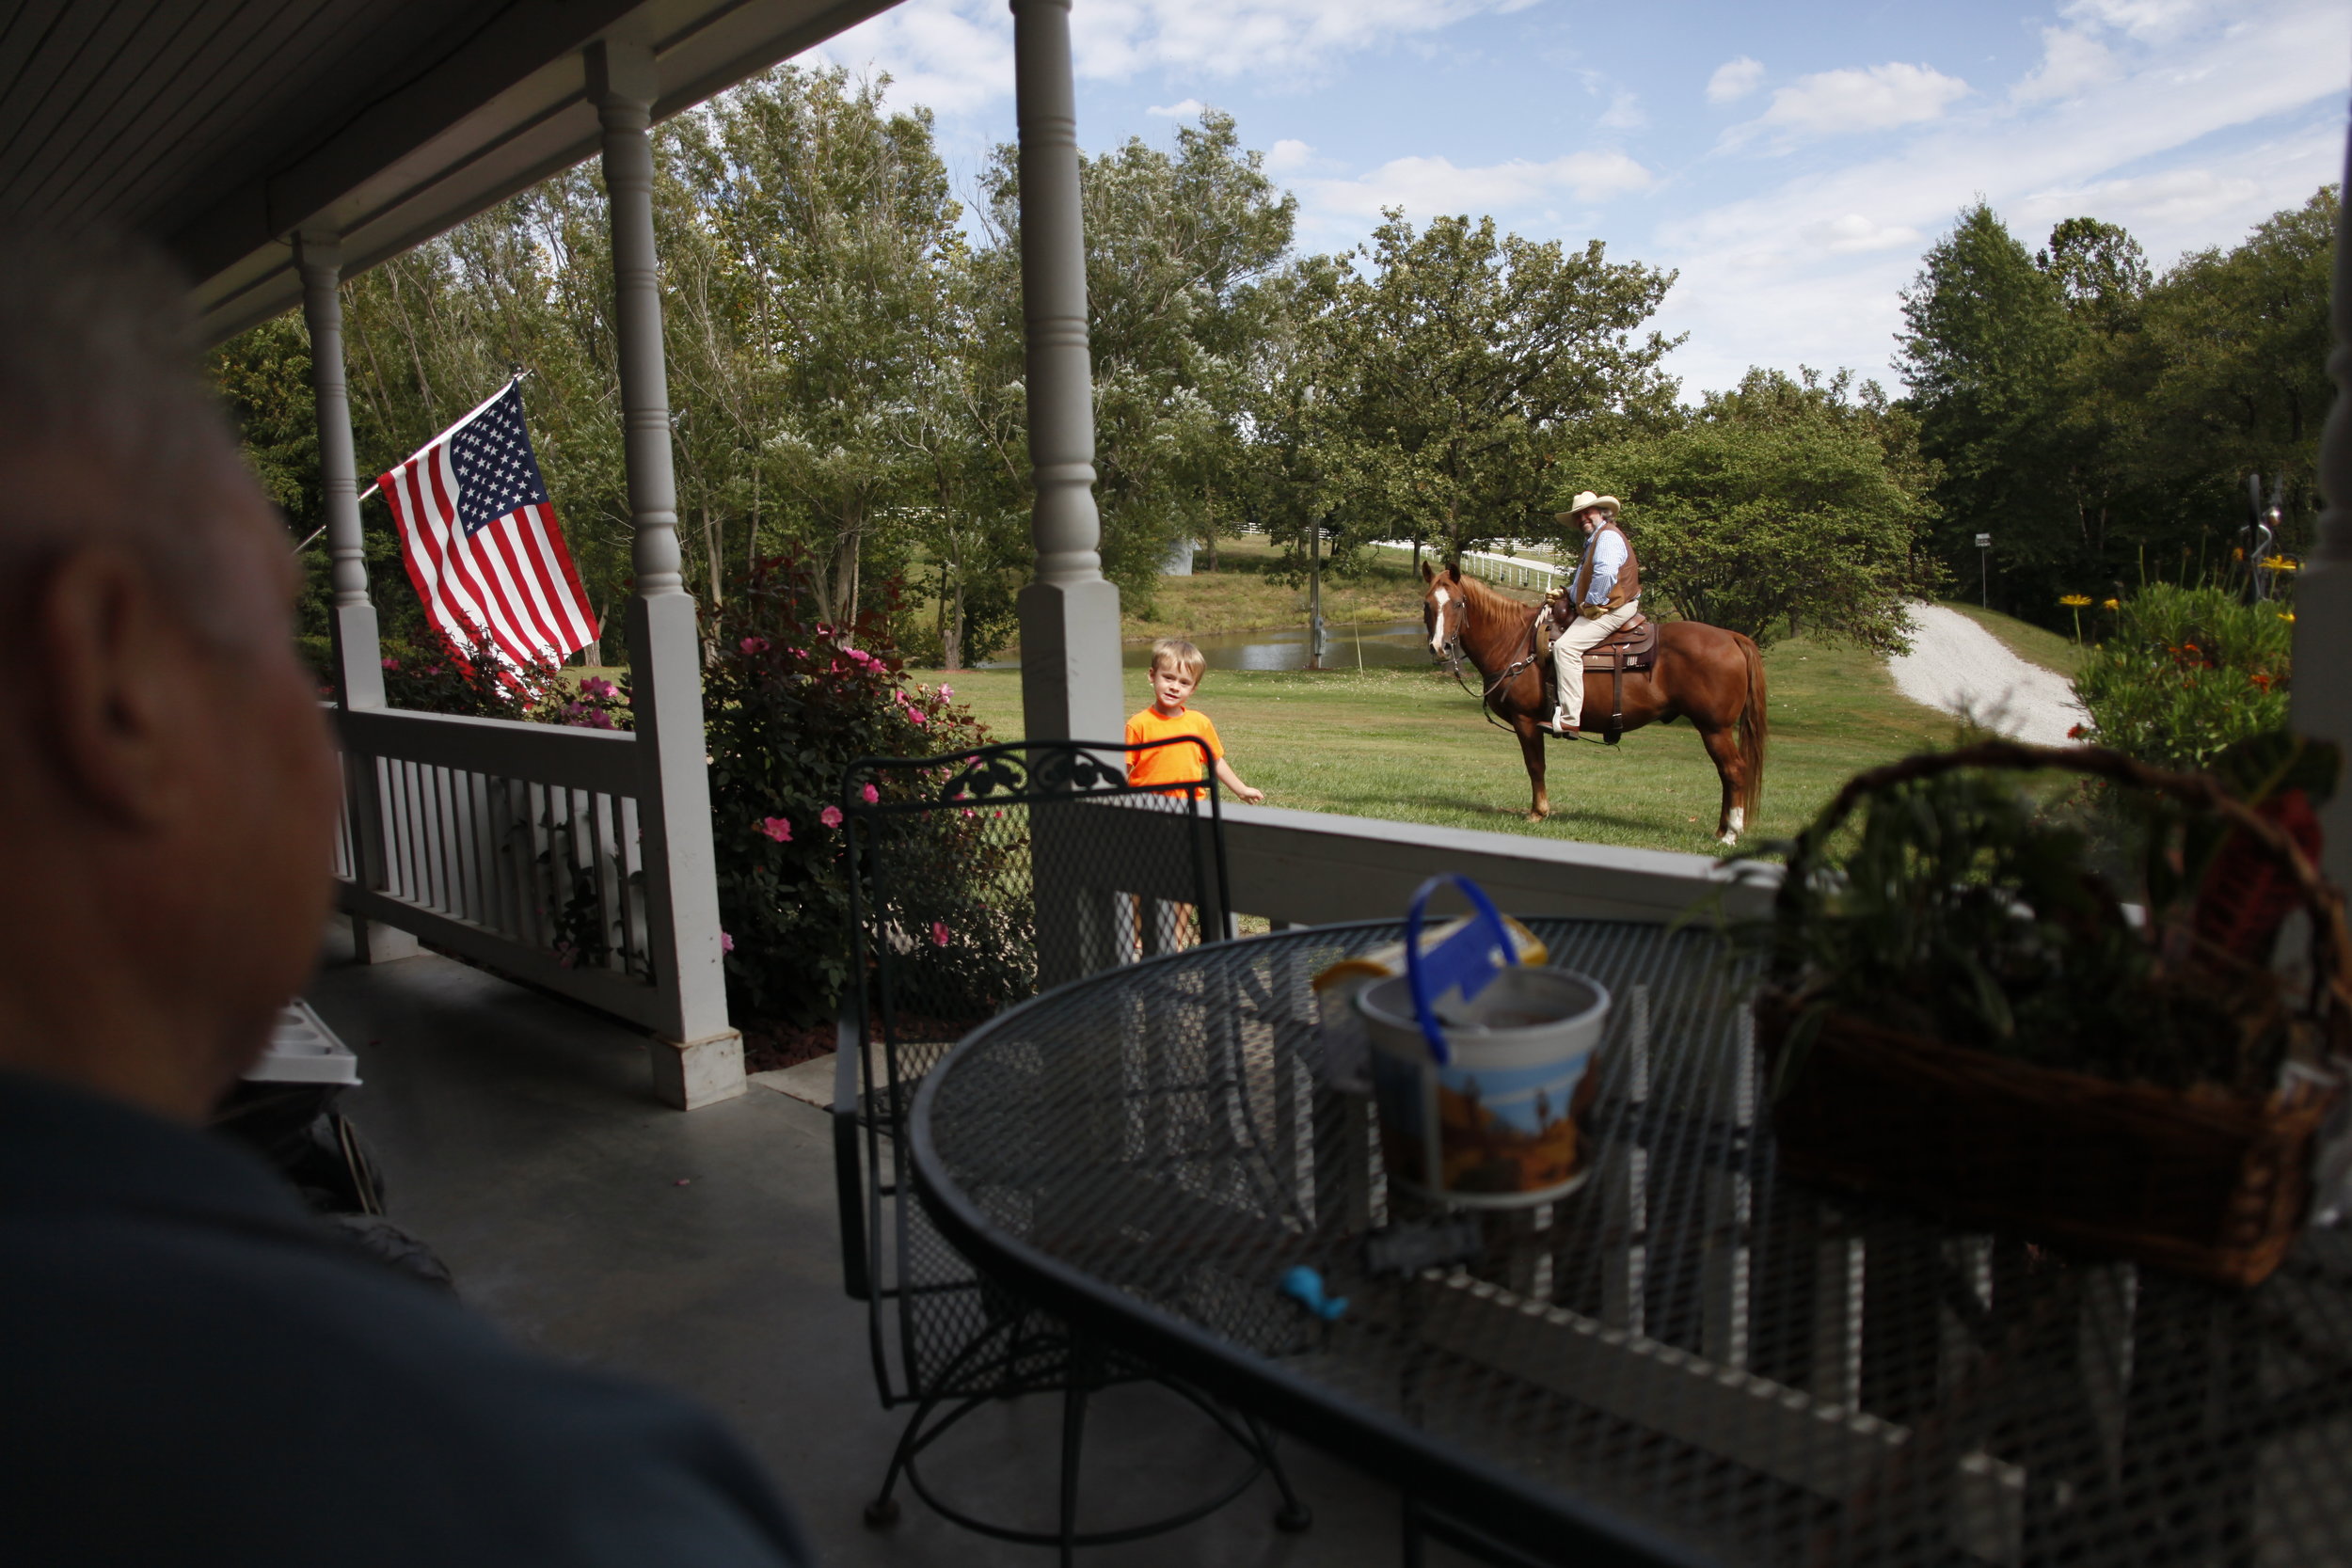  Rusty Savage, 51, center, talks to his friend, Carol Dell Buckler, 77 at Buckler’s front yard on Tuesday, Sept. 23, 2014 in Weston, Mo. Savage commented that Buckler bought that horse, Duke, for Savage to ride. Currently, Buckler’s property is on th